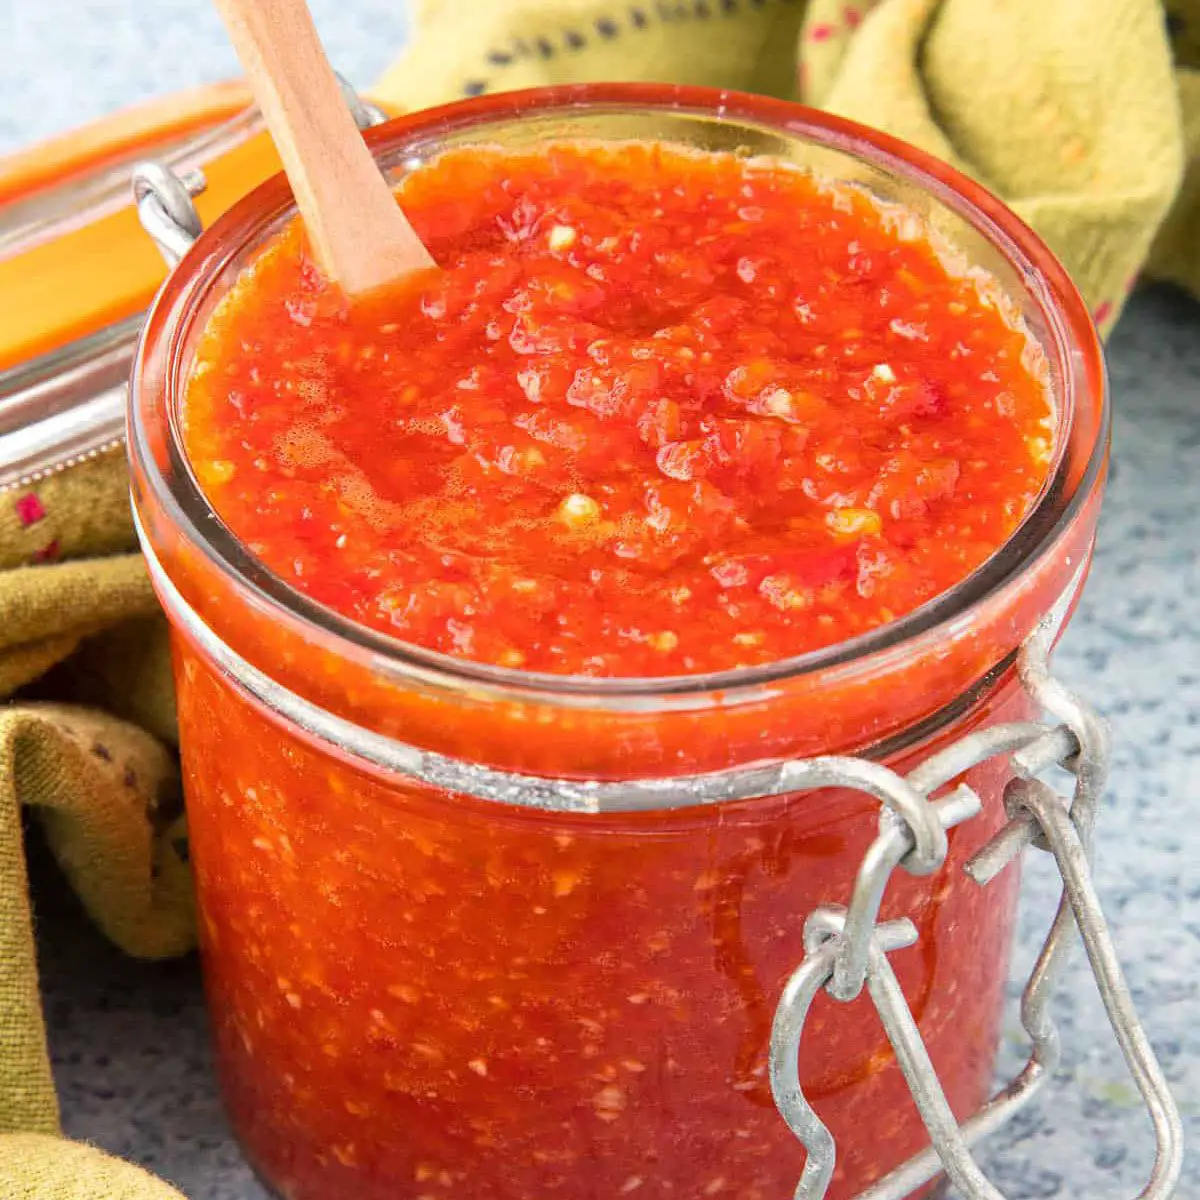 9 Chili Pepper Sauce Recipes You Have to Try